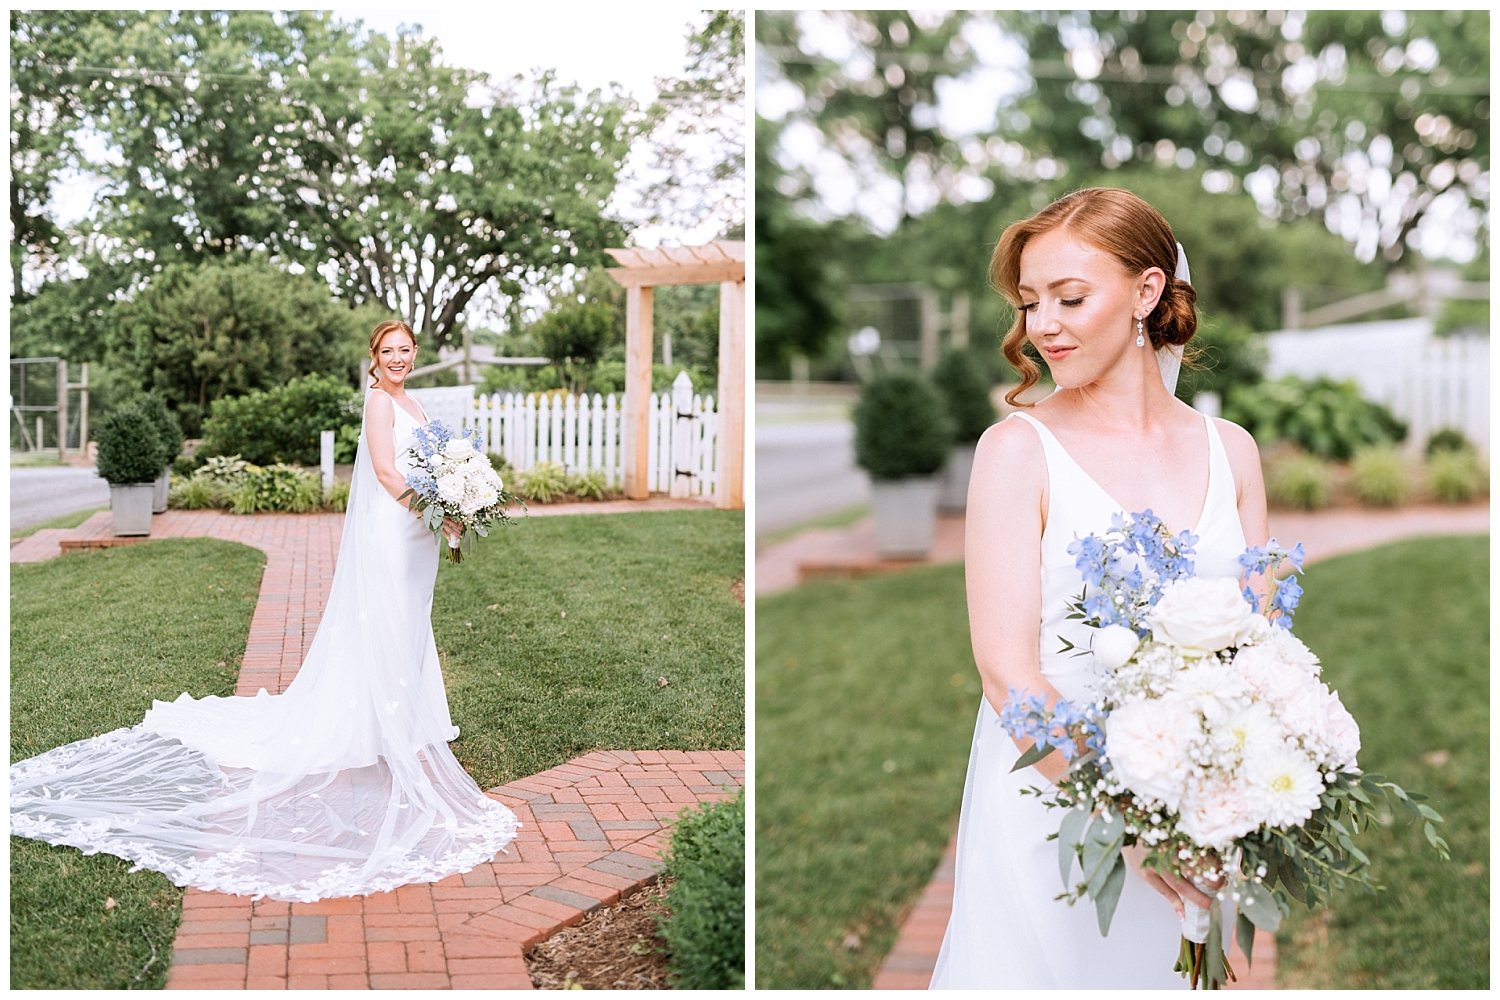 Bridal portraits with bouquet at Fleetwood Farm Winery wedding in Leesburg, Virginia